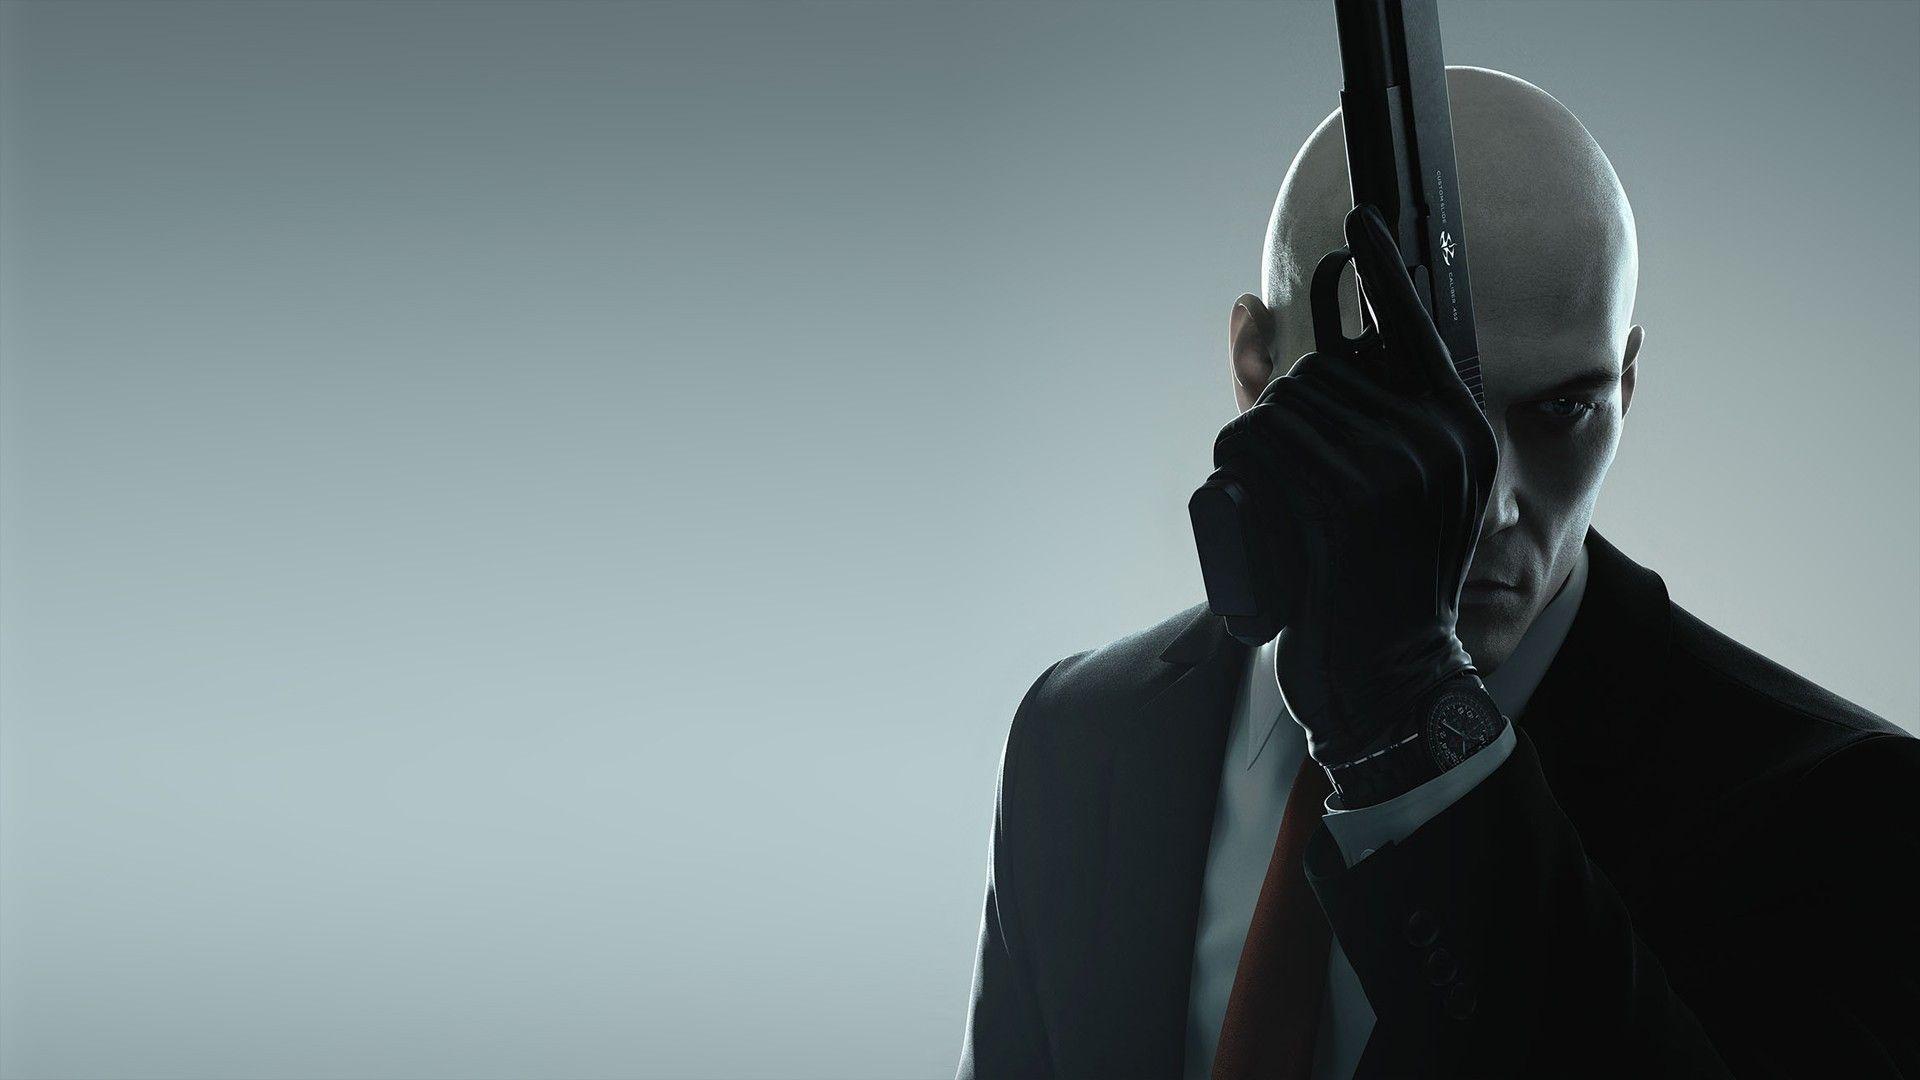 Hitman (2016) Full HD Wallpaper and Background Imagex1080